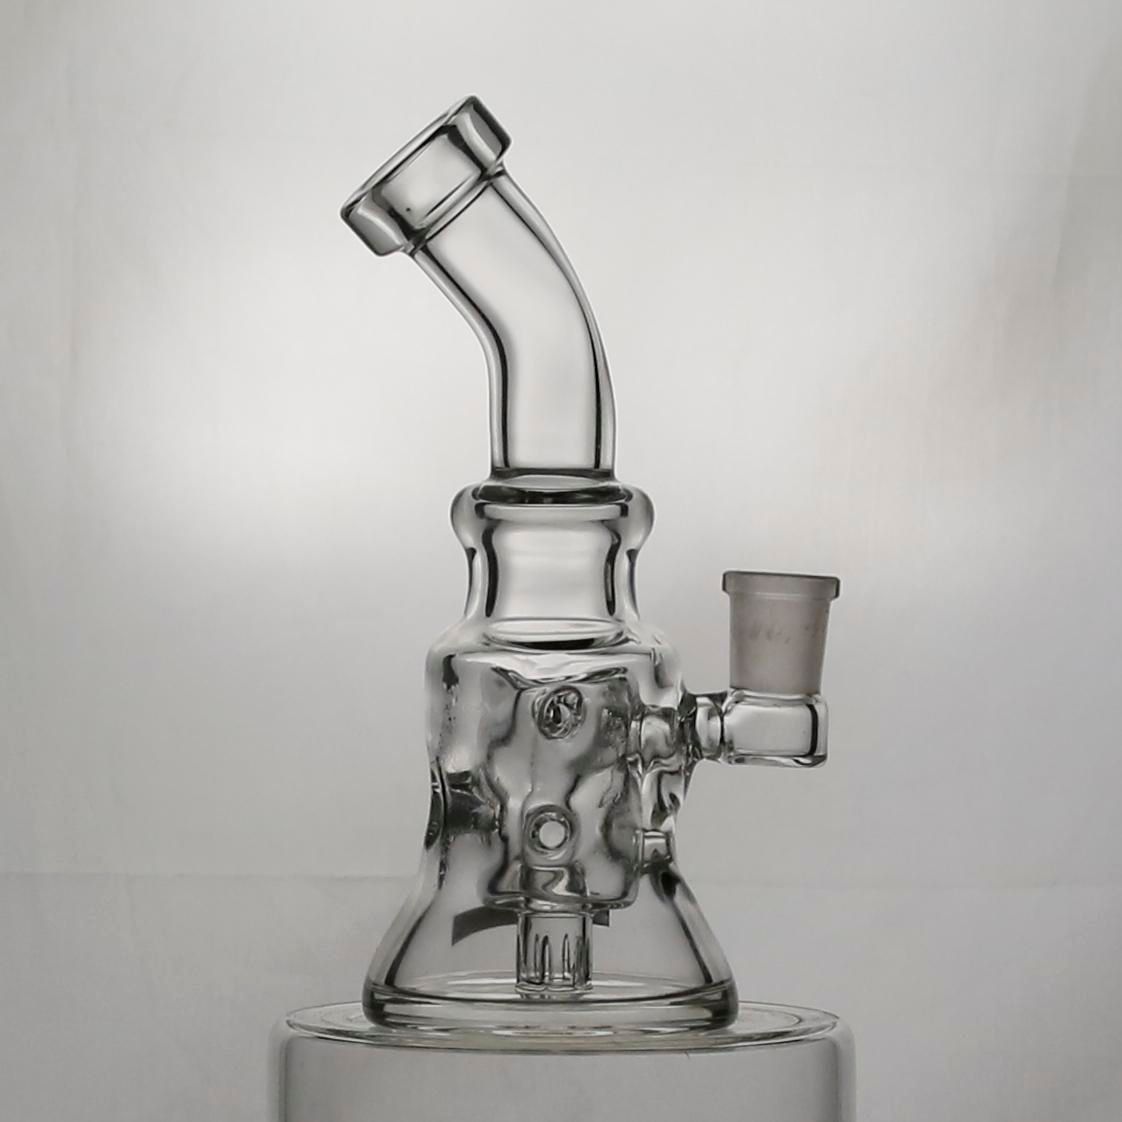 2015%20Feb%20Newest%20Glass%20bong%209%22%20inches%20Skull%20water%20pipe%20smoking%20pipe%20two%20function%20dry%20herb%20use%20oil%20rig%20use%20with%20cermaic%20carb%20cap%20tool.jpg